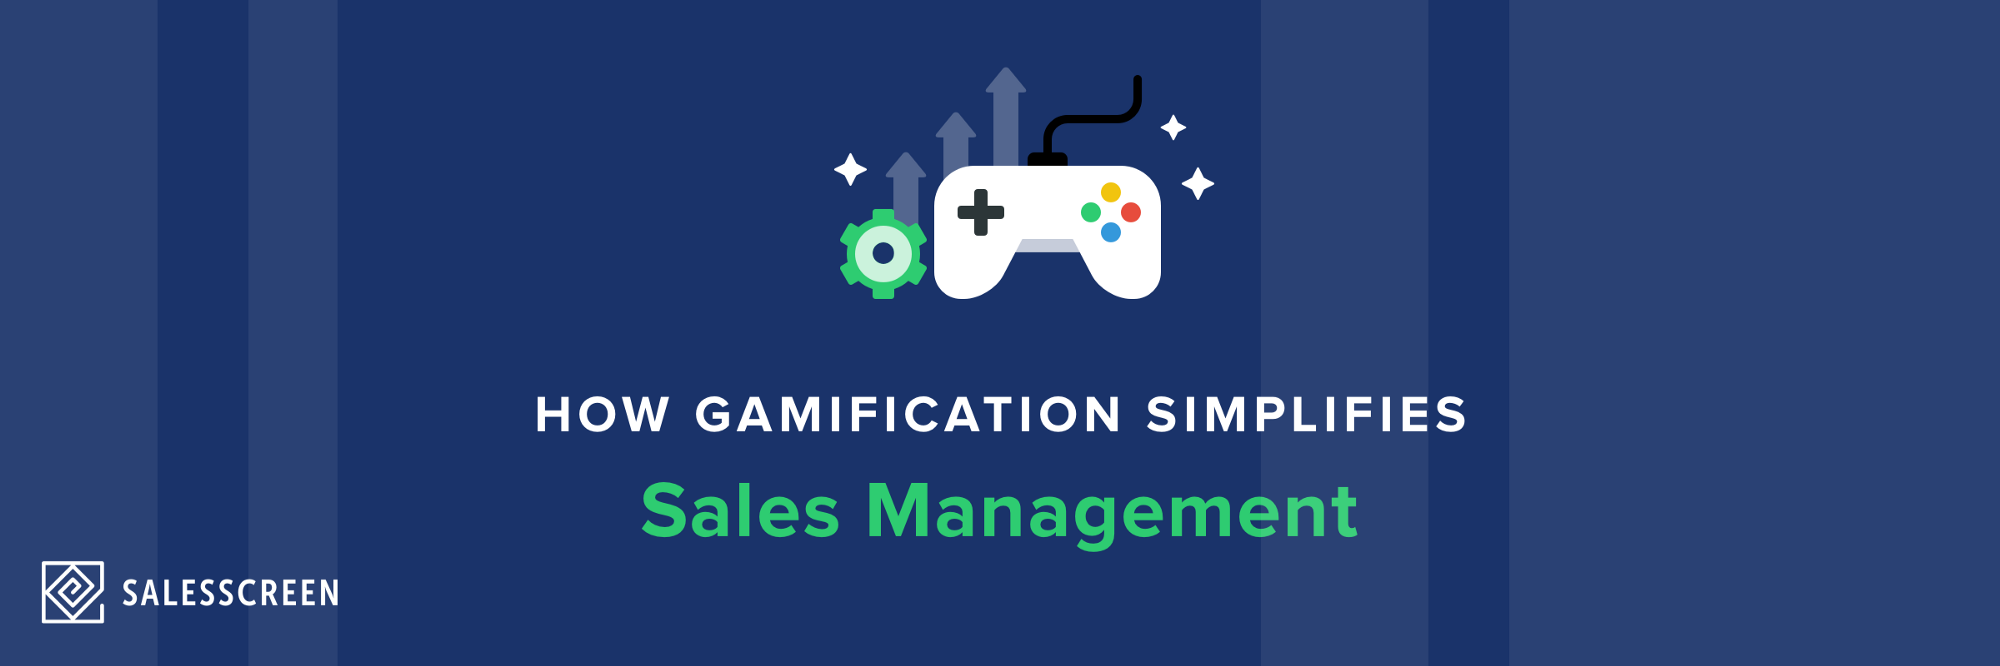 How Gamification Simplifies Sales Management